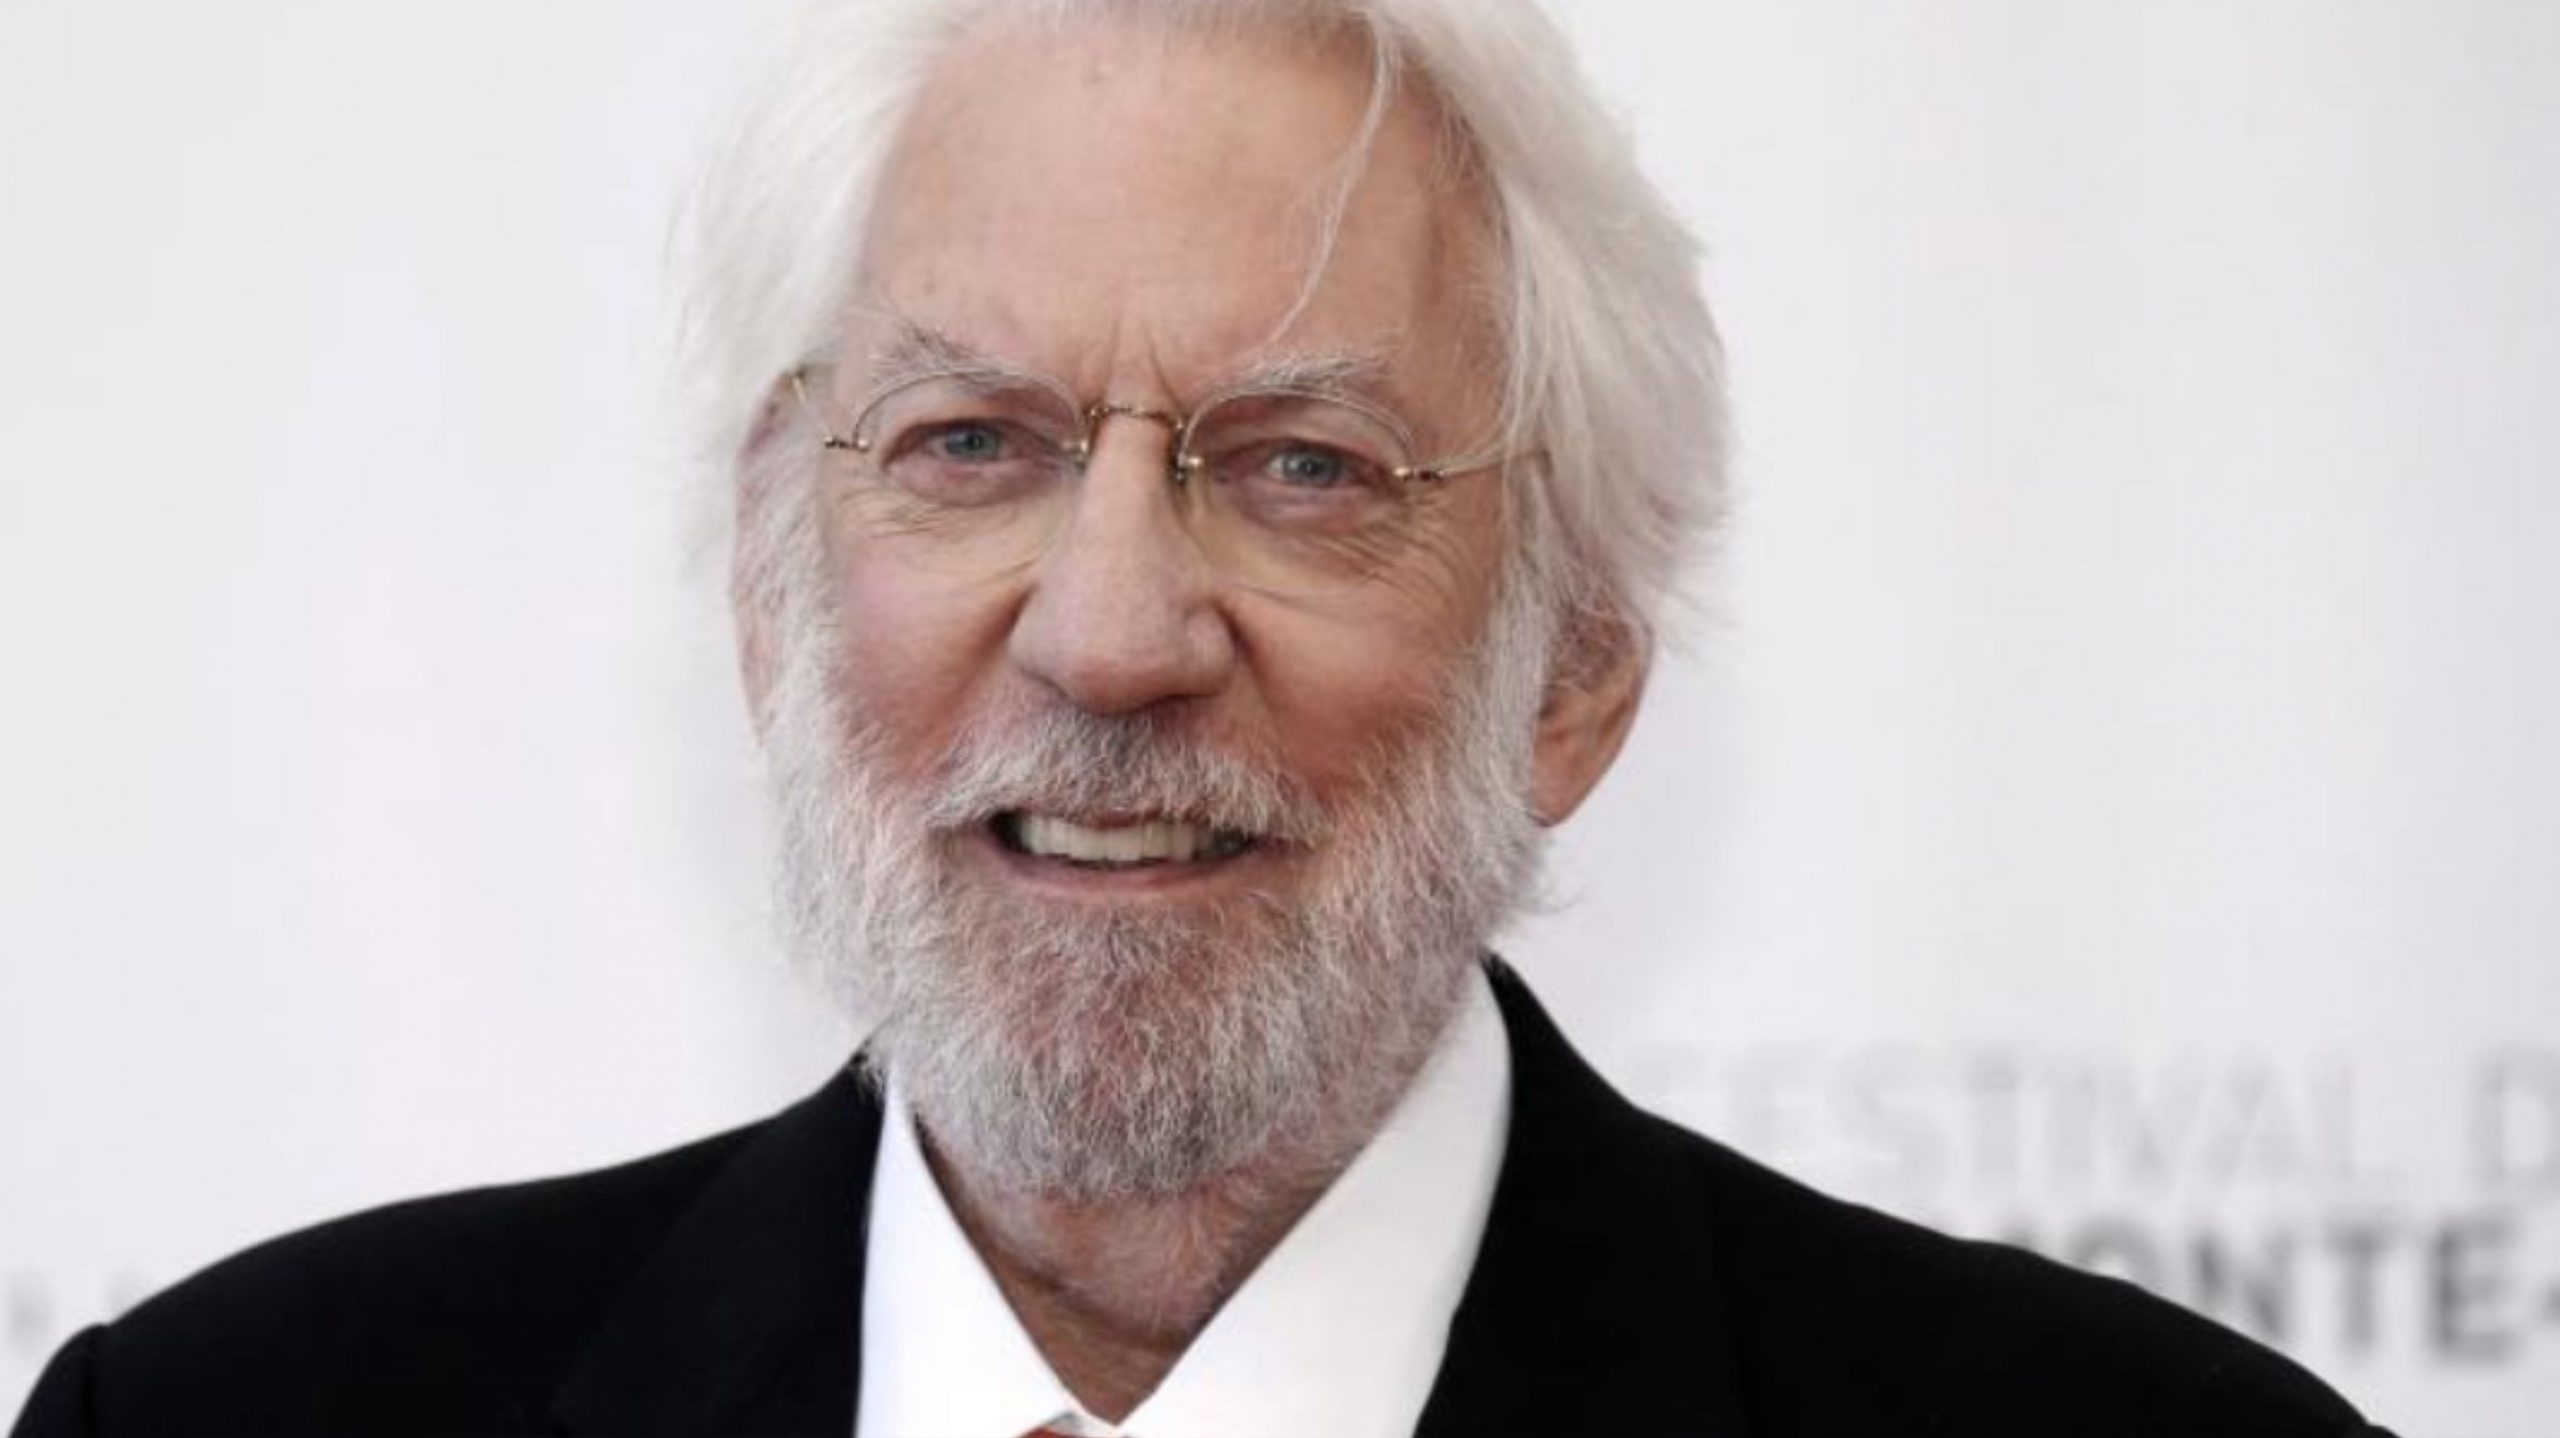 Actor Donald Sutherland, star of &#8220;The Dirty Dozen&#8221; and &#8220;Hunger Games&#8221;, has died, Magnate Daily